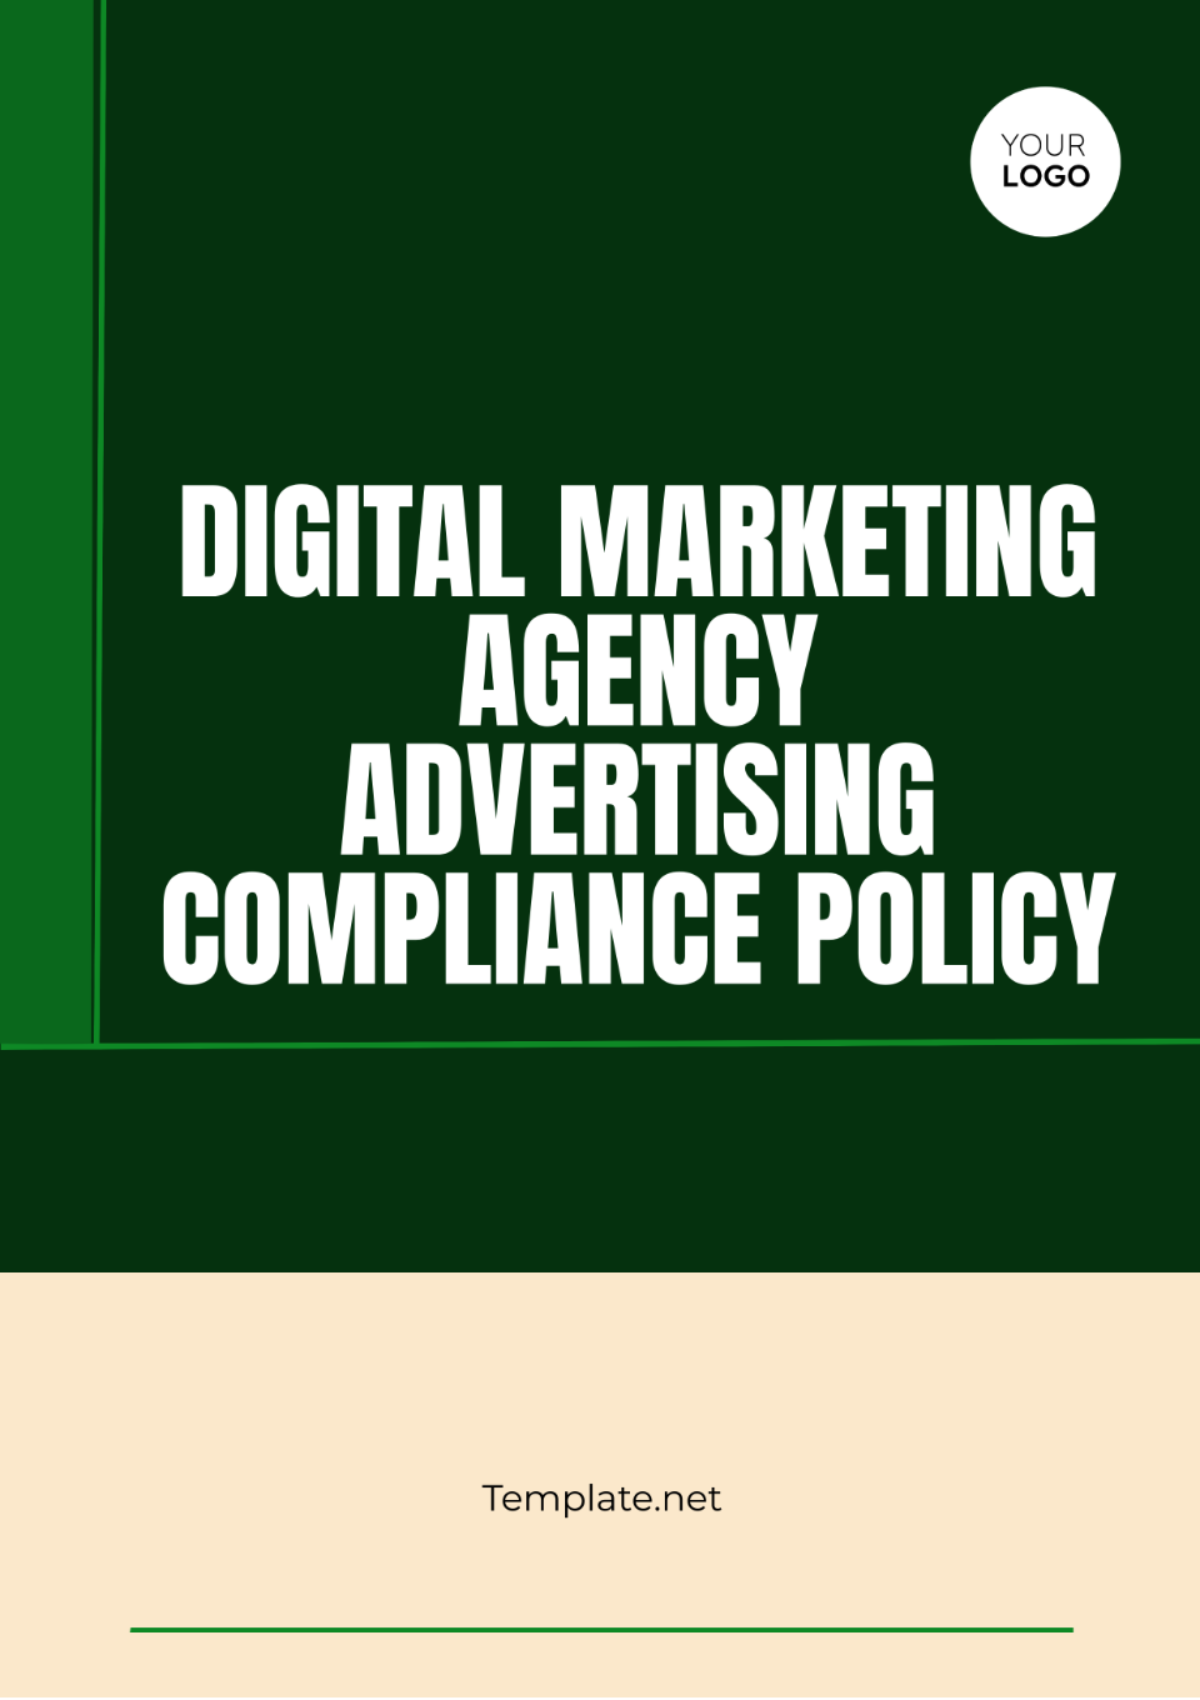 Free Digital Marketing Agency Advertising Compliance Policy Template